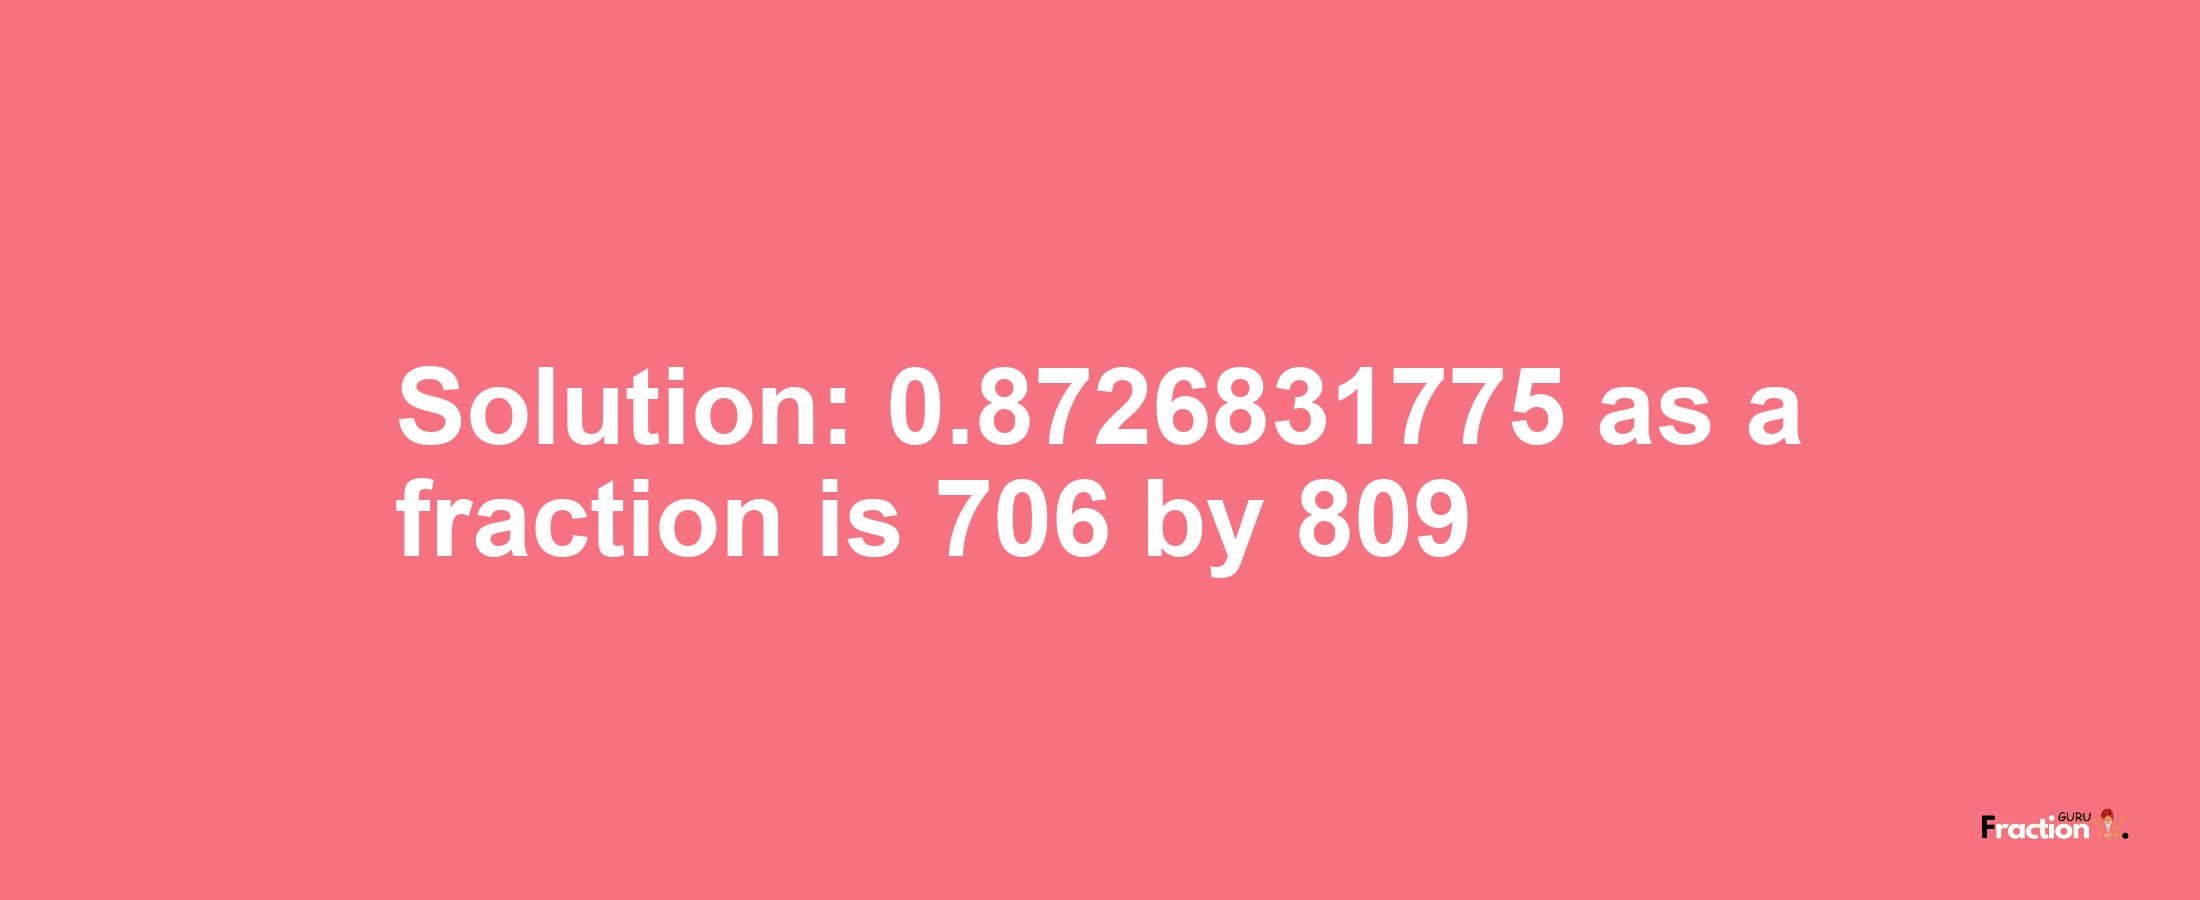 Solution:0.8726831775 as a fraction is 706/809